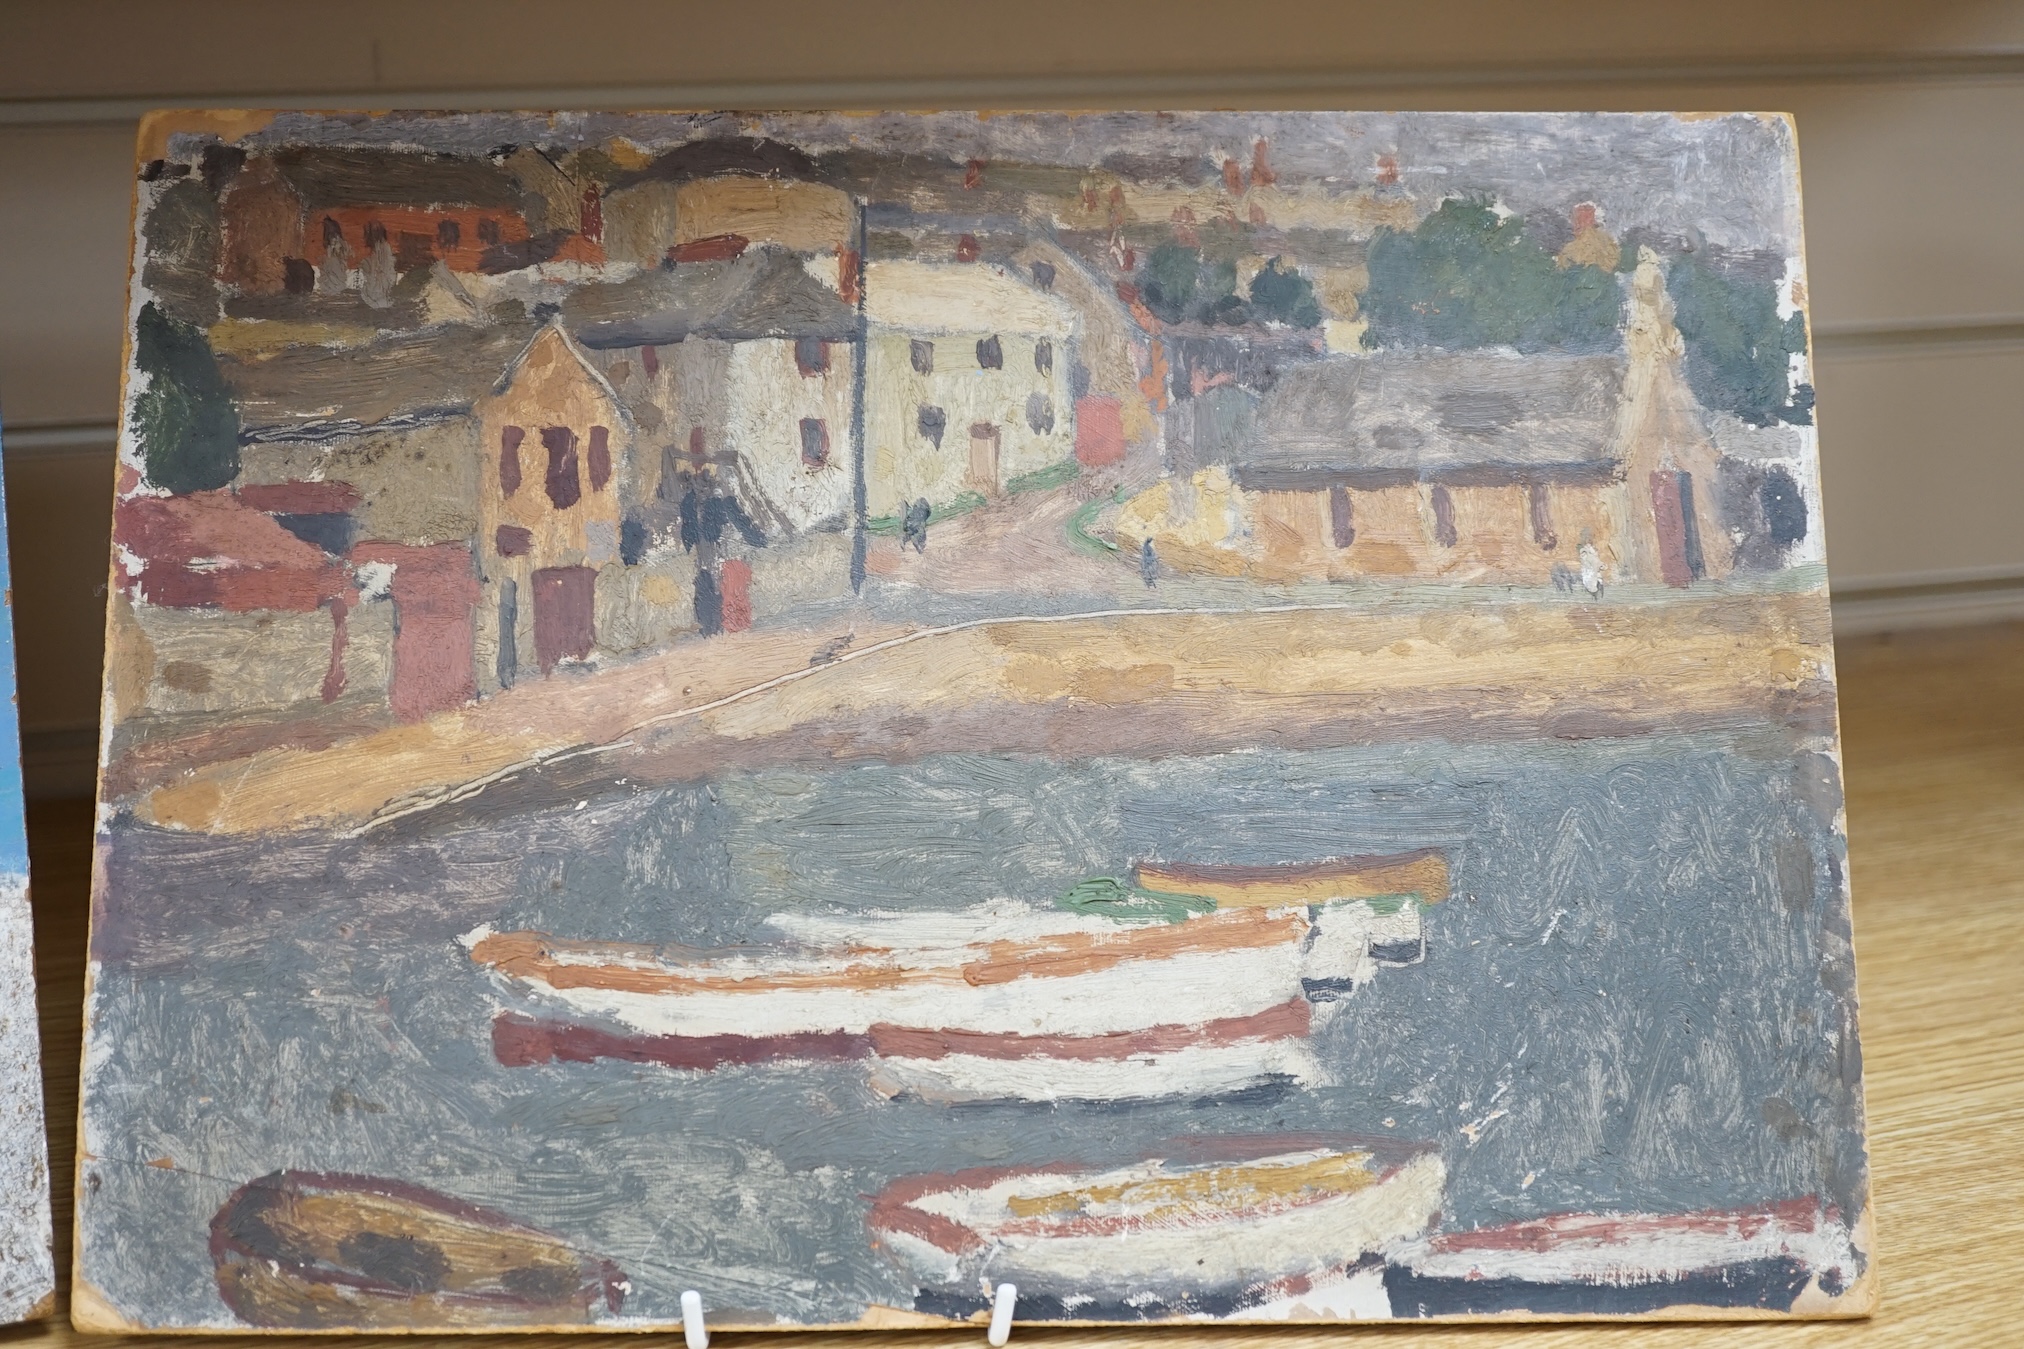 From the Studio of Fred Cuming. oil on board, Harbour view with boats, unsigned, 25 x 25cm, unframed. Condition - poor